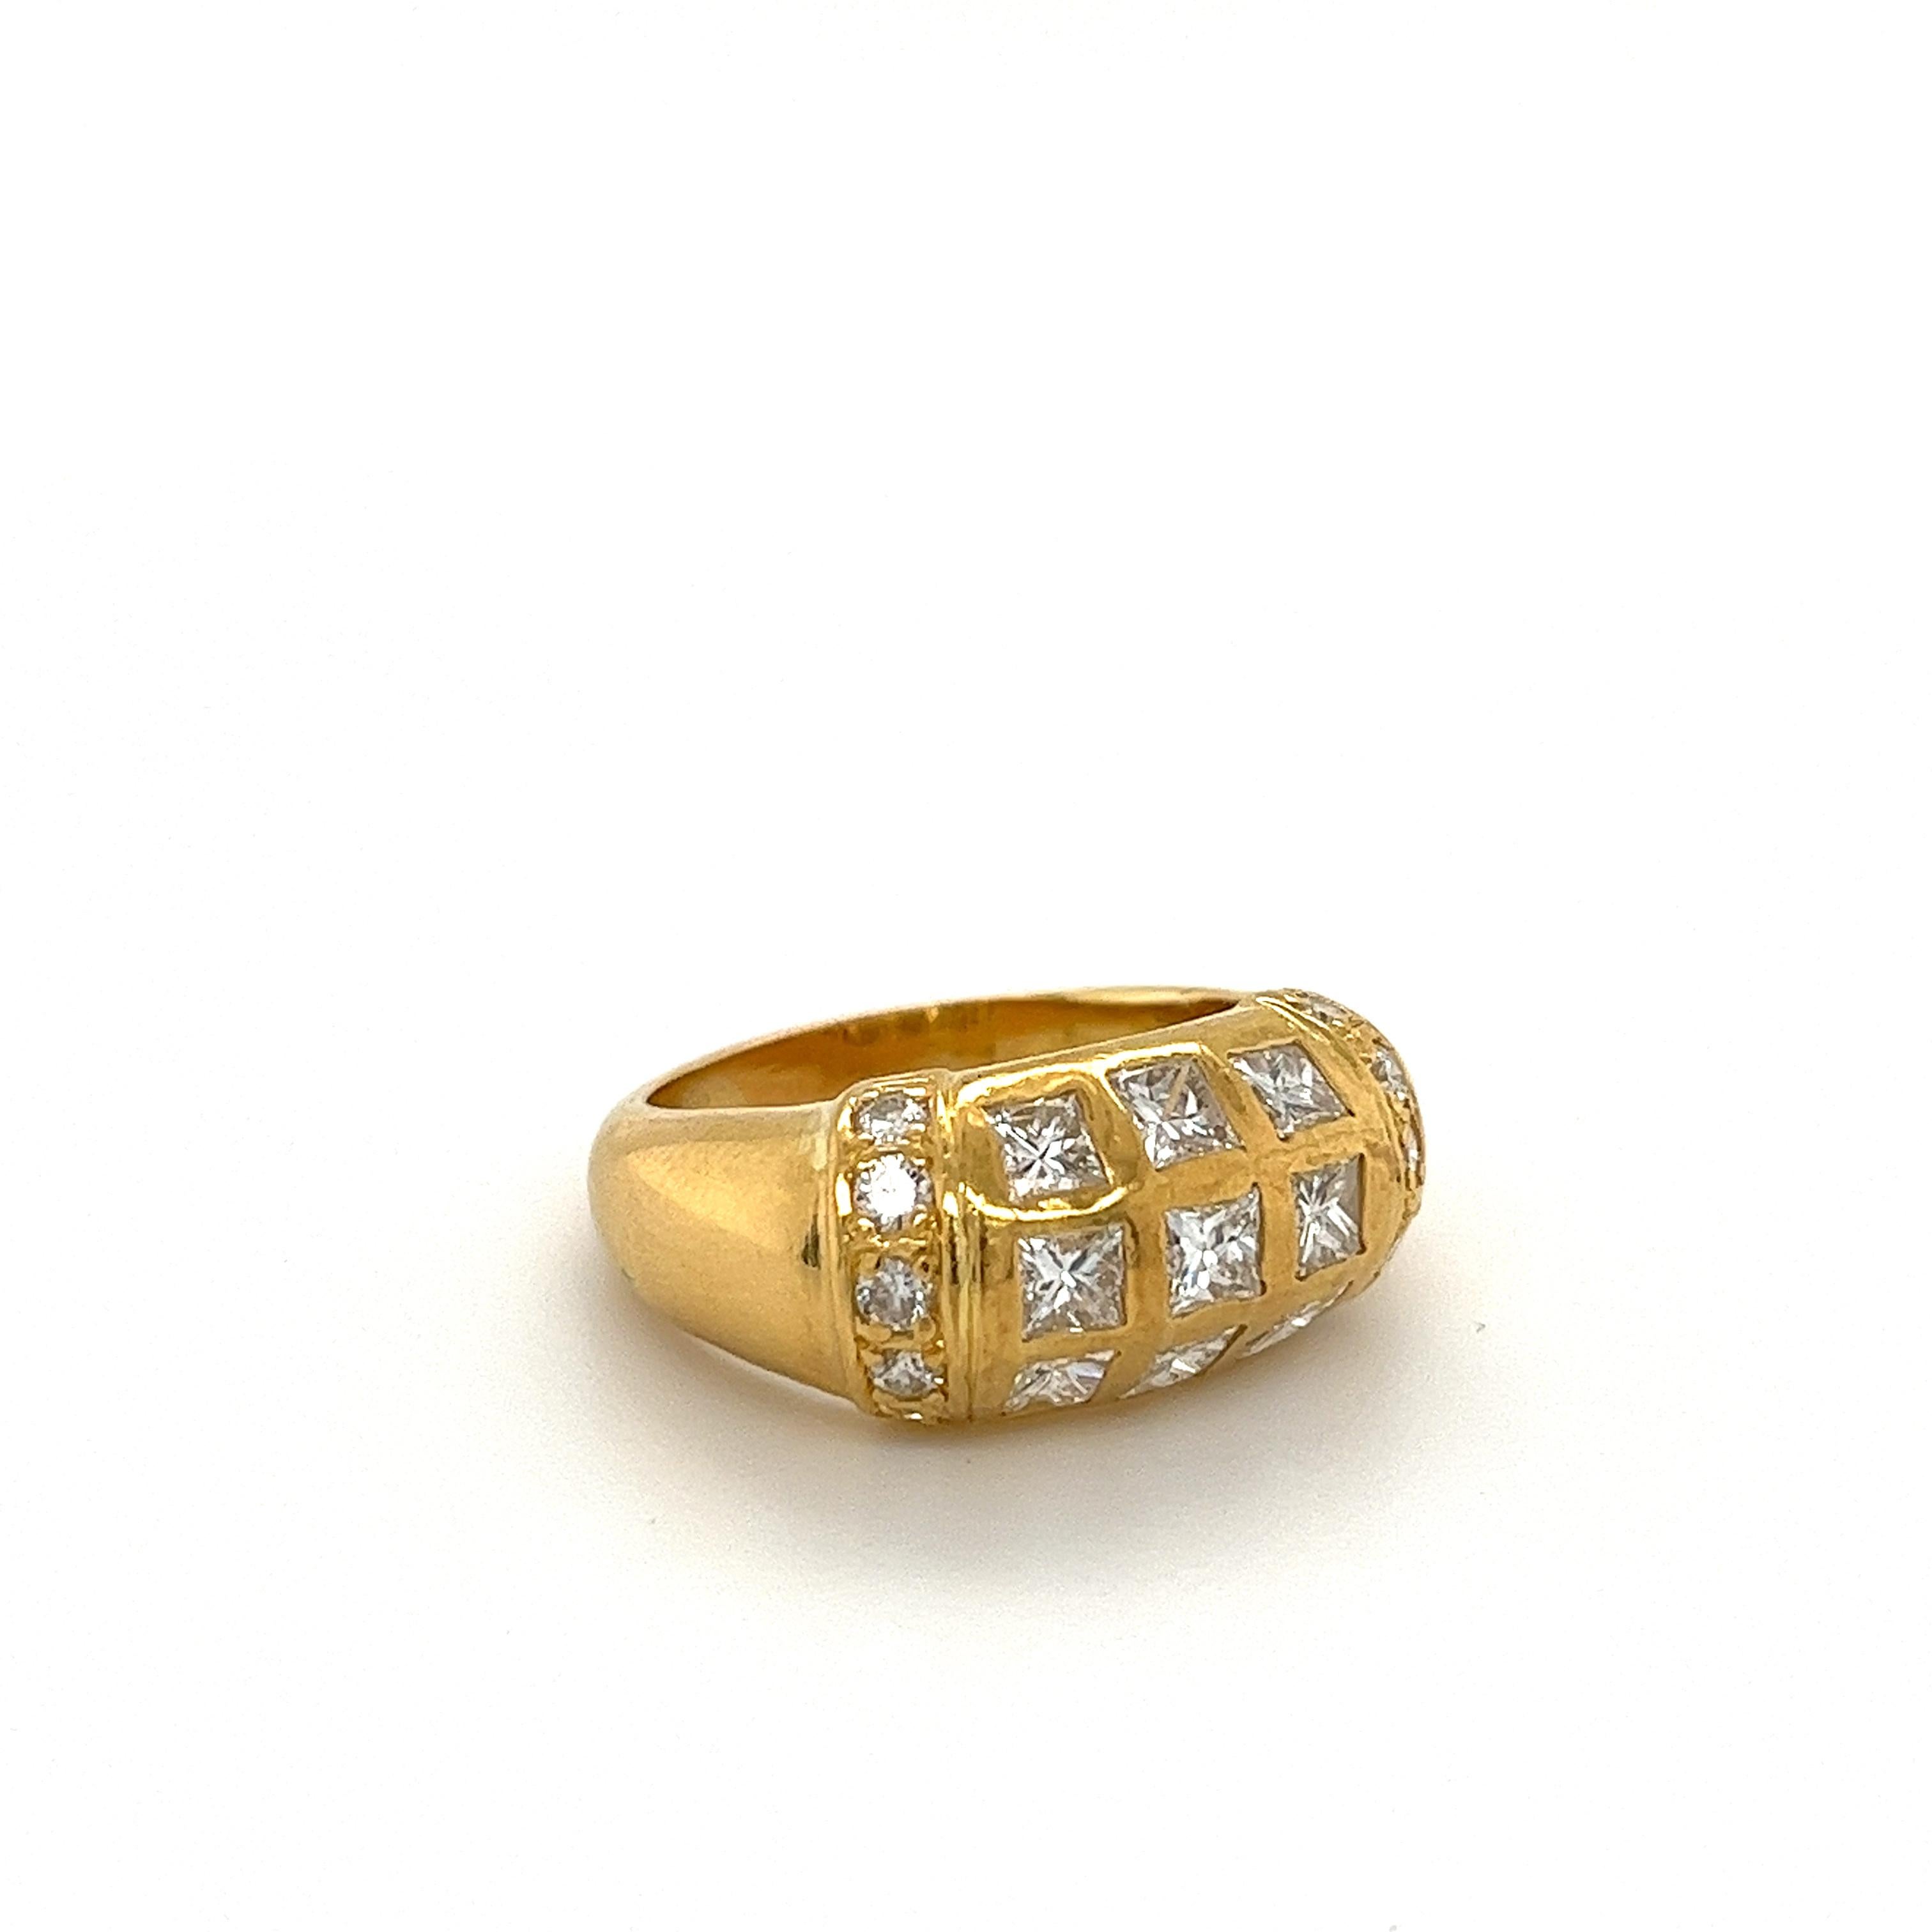 Princess cut natural diamond cluster dome ring in 18k solid yellow gold. Featuring 9 princess cut diamonds and 10 round brilliant cut diamonds of white,  eye-clean quality. 

Ideal as a ladies cocktail ring and men's pinky ring. 

Ring Details:
✔